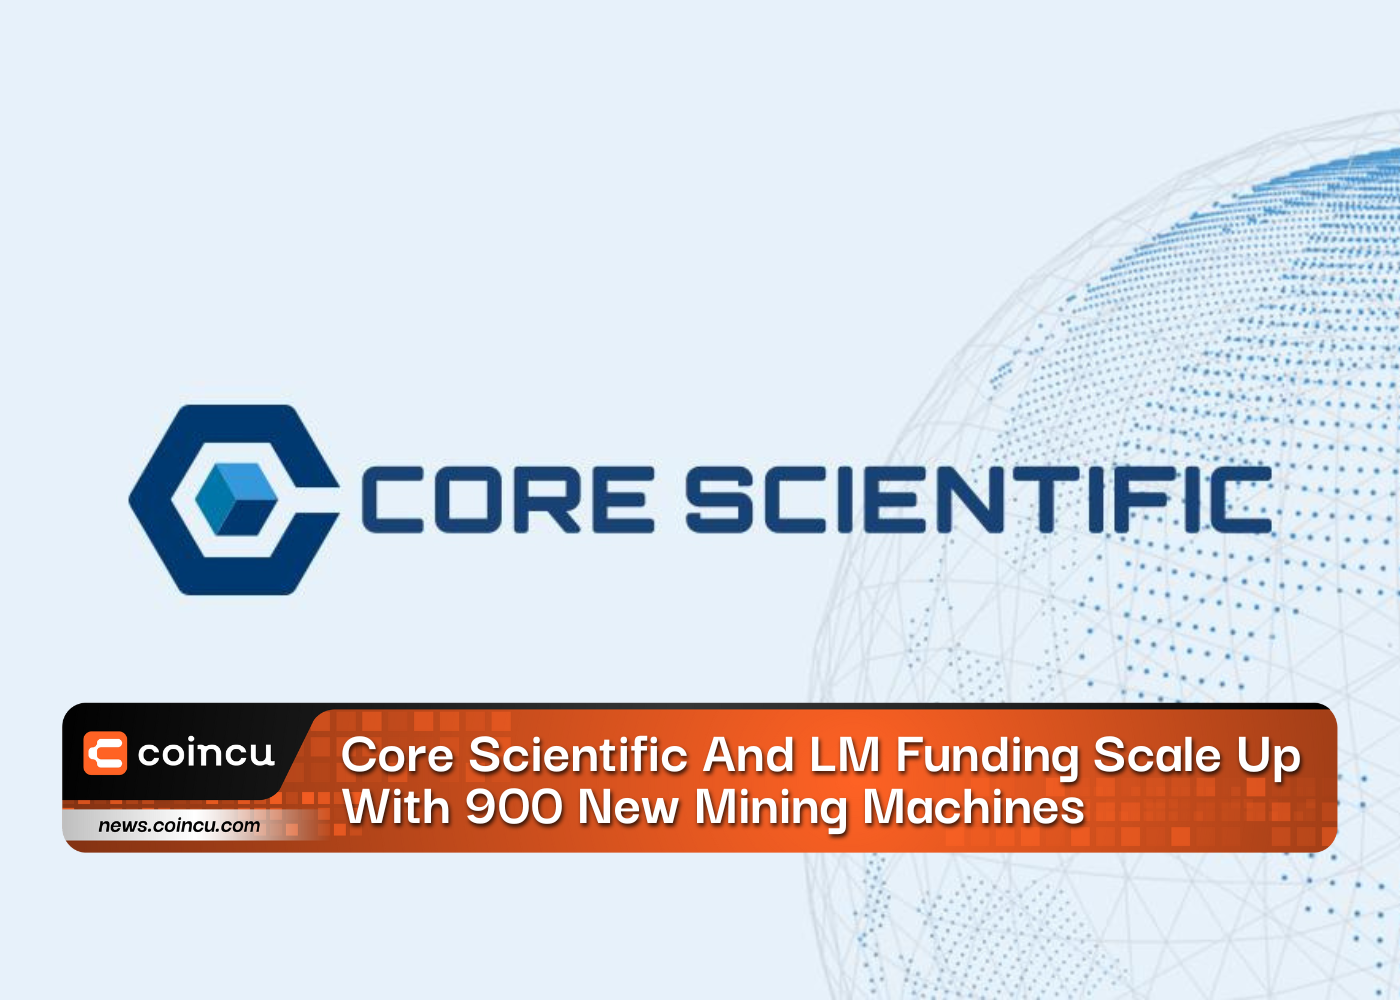 Core Scientific And LM Funding Scale Up